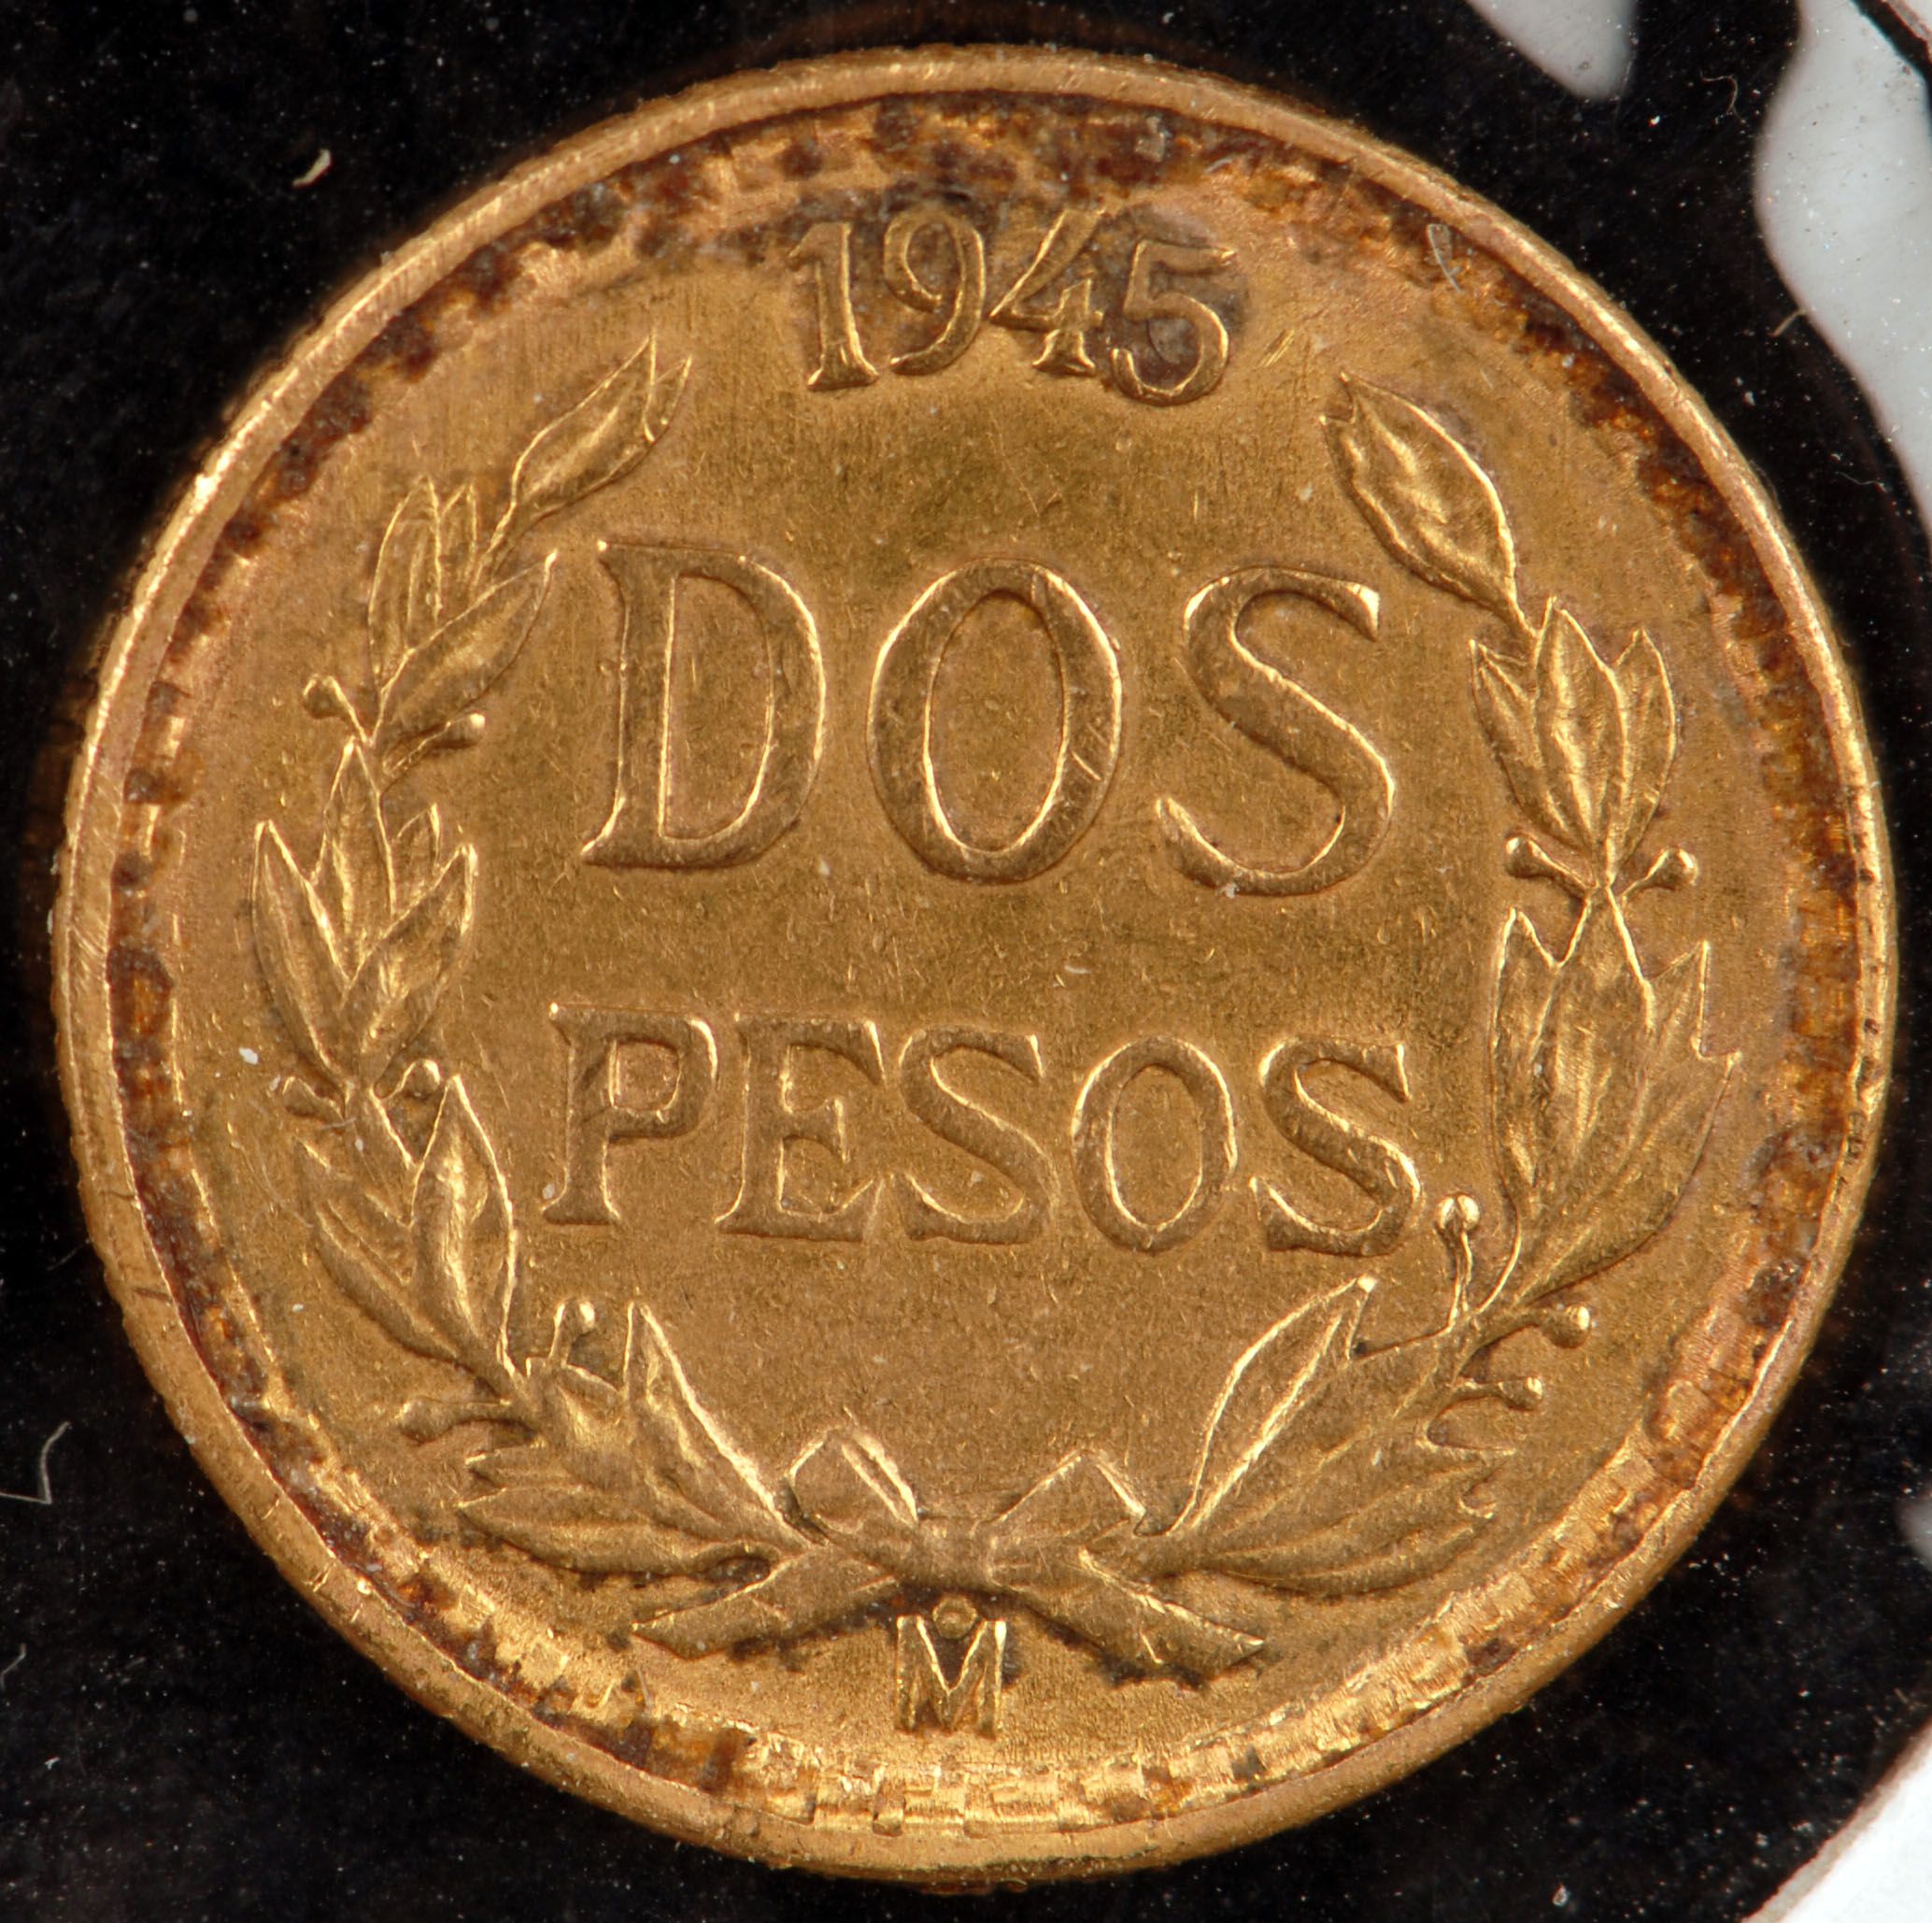 Peso Coin (restrike) pulled from a jewelry bezel. Coin shows rim